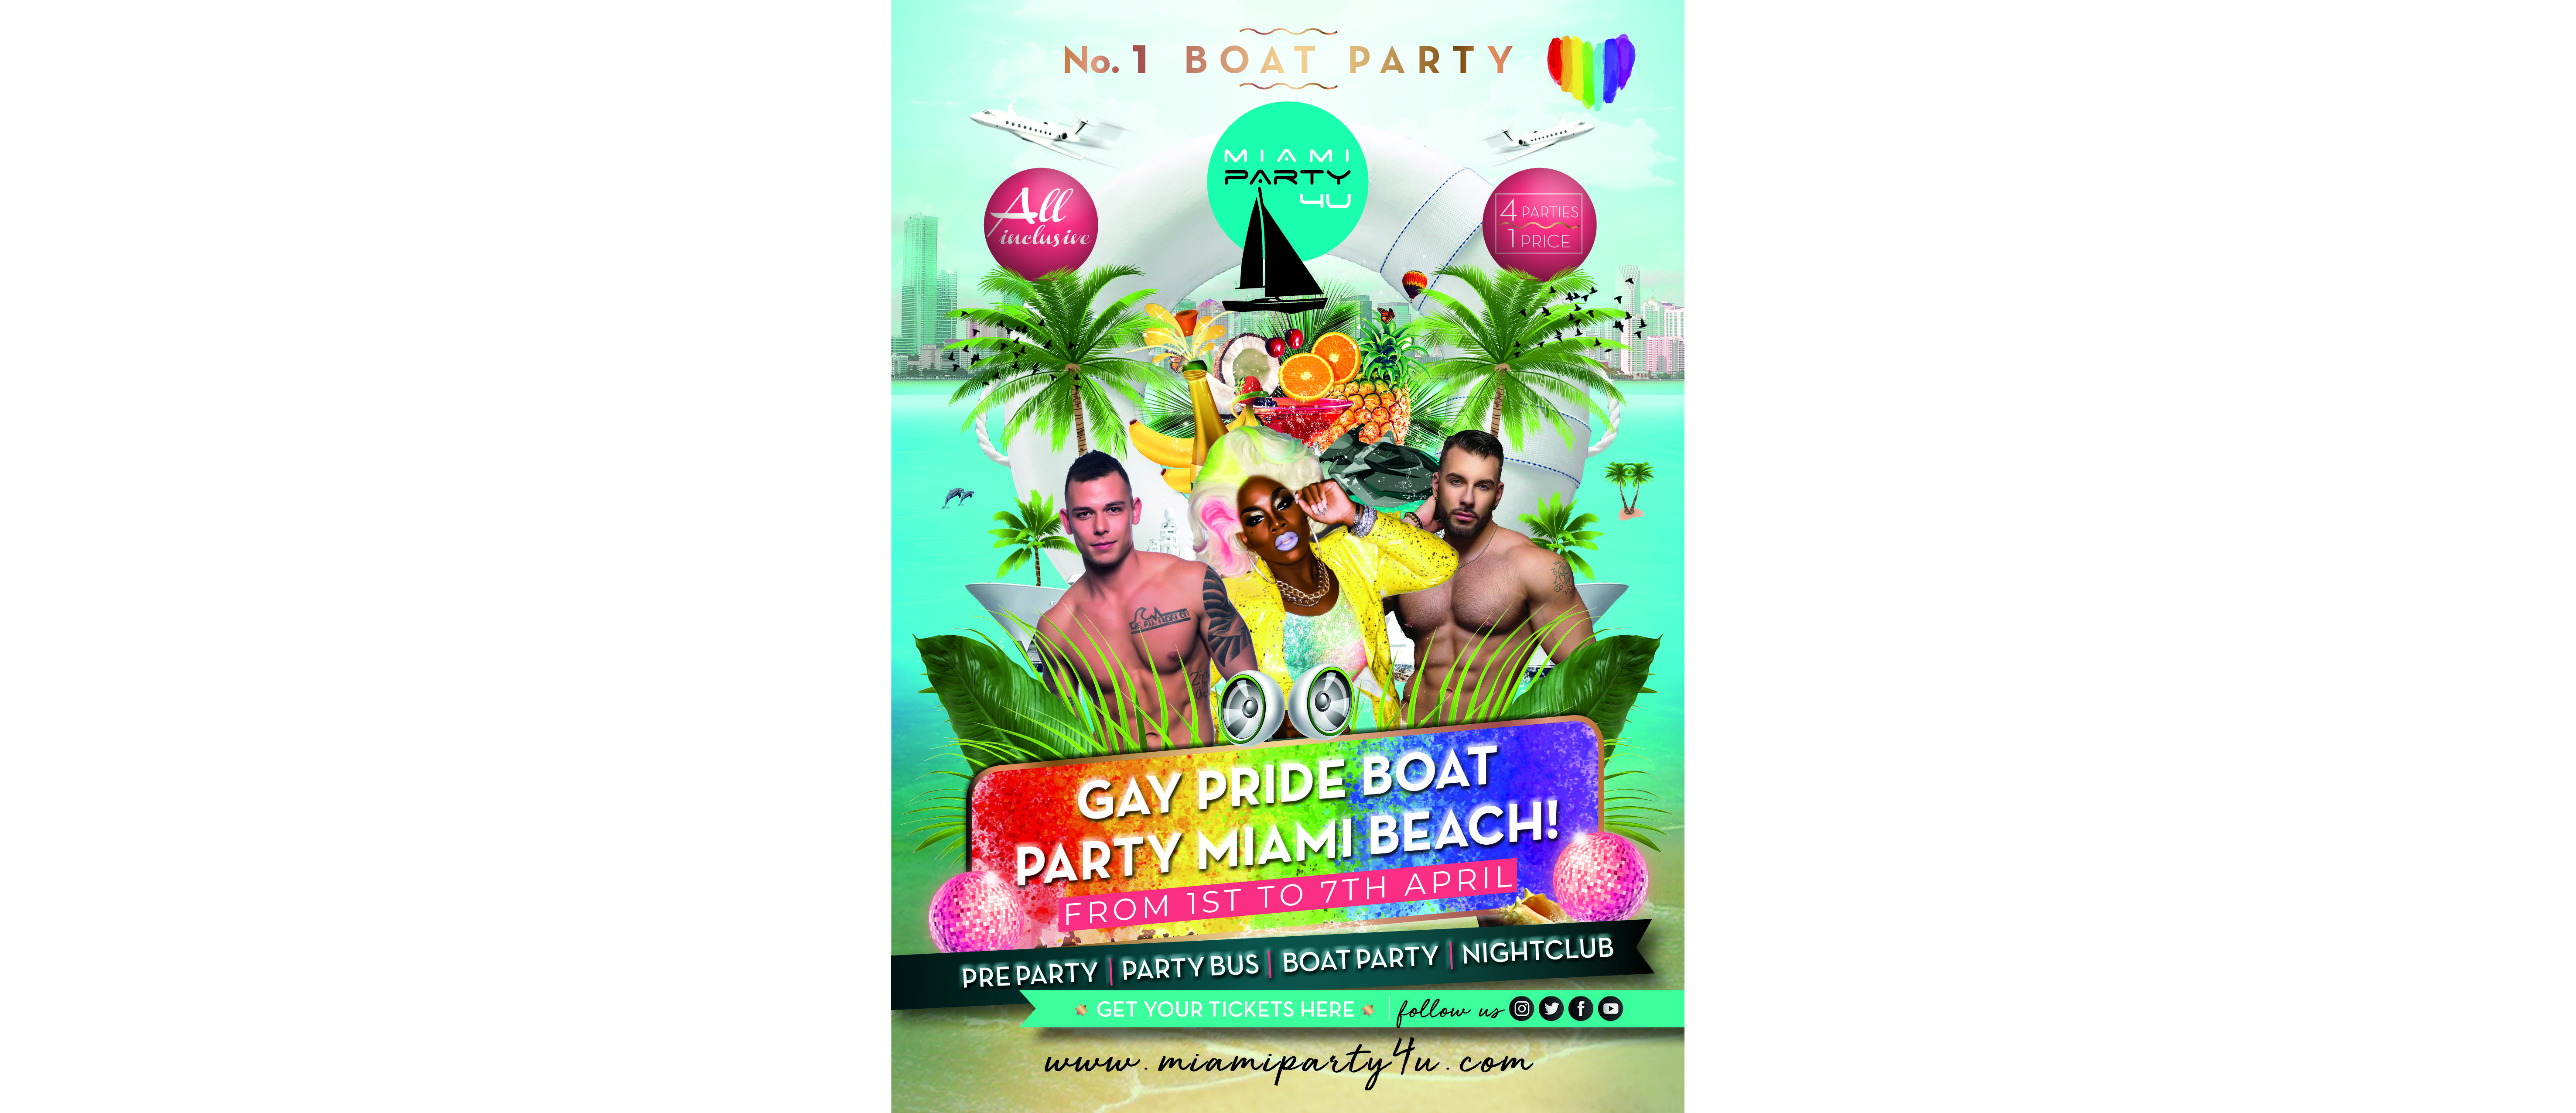 THE BEST PARTY BOAT IN MIAMI GAY PRIDE